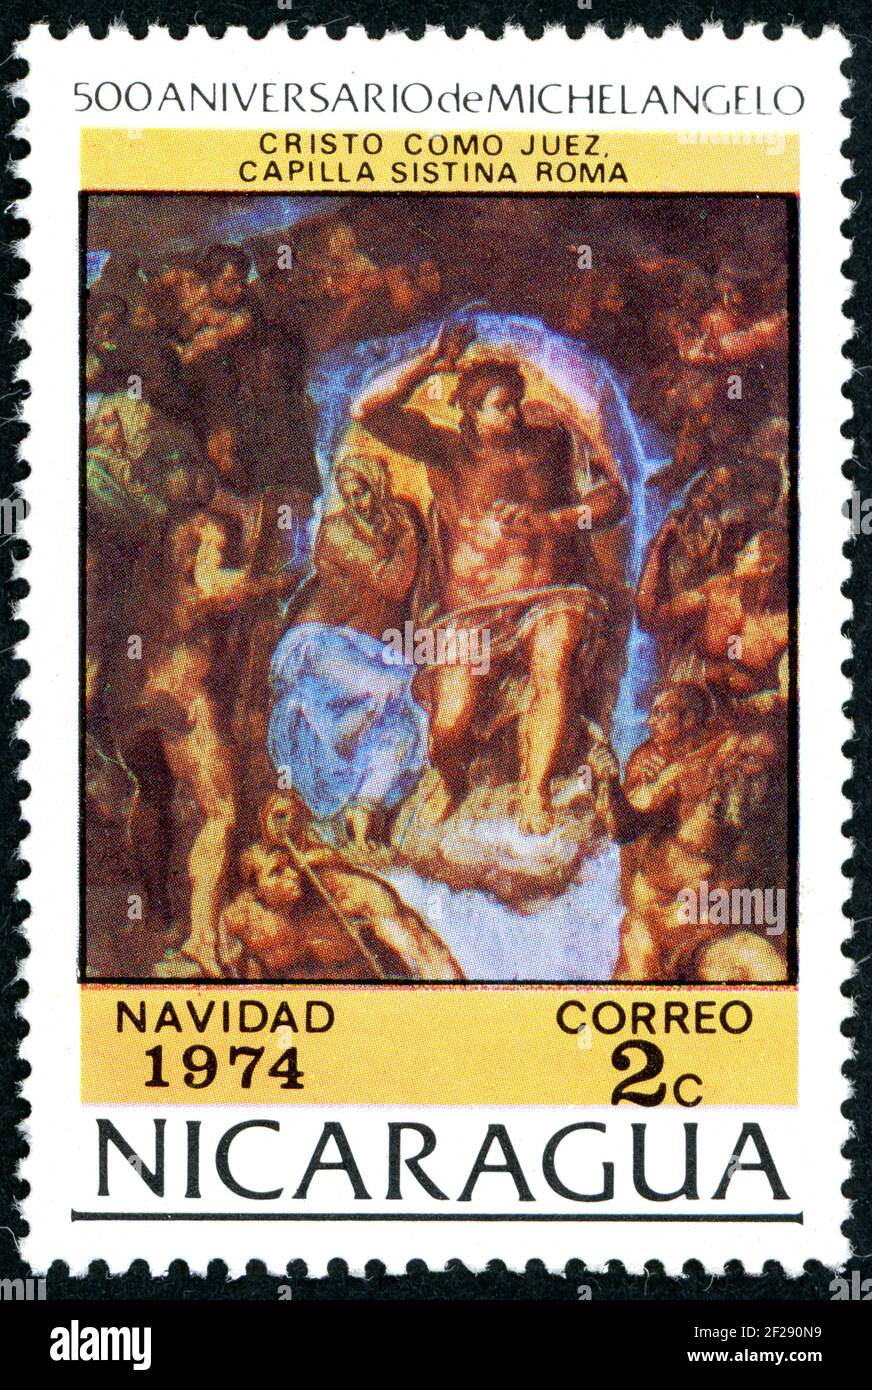 NICARAGUA - CIRCA 1974: A stamp printed in Nicaragua, Christmas issue, shown the painting by Michelangelo - The Last Judgment, circa 1974 Stock Photo